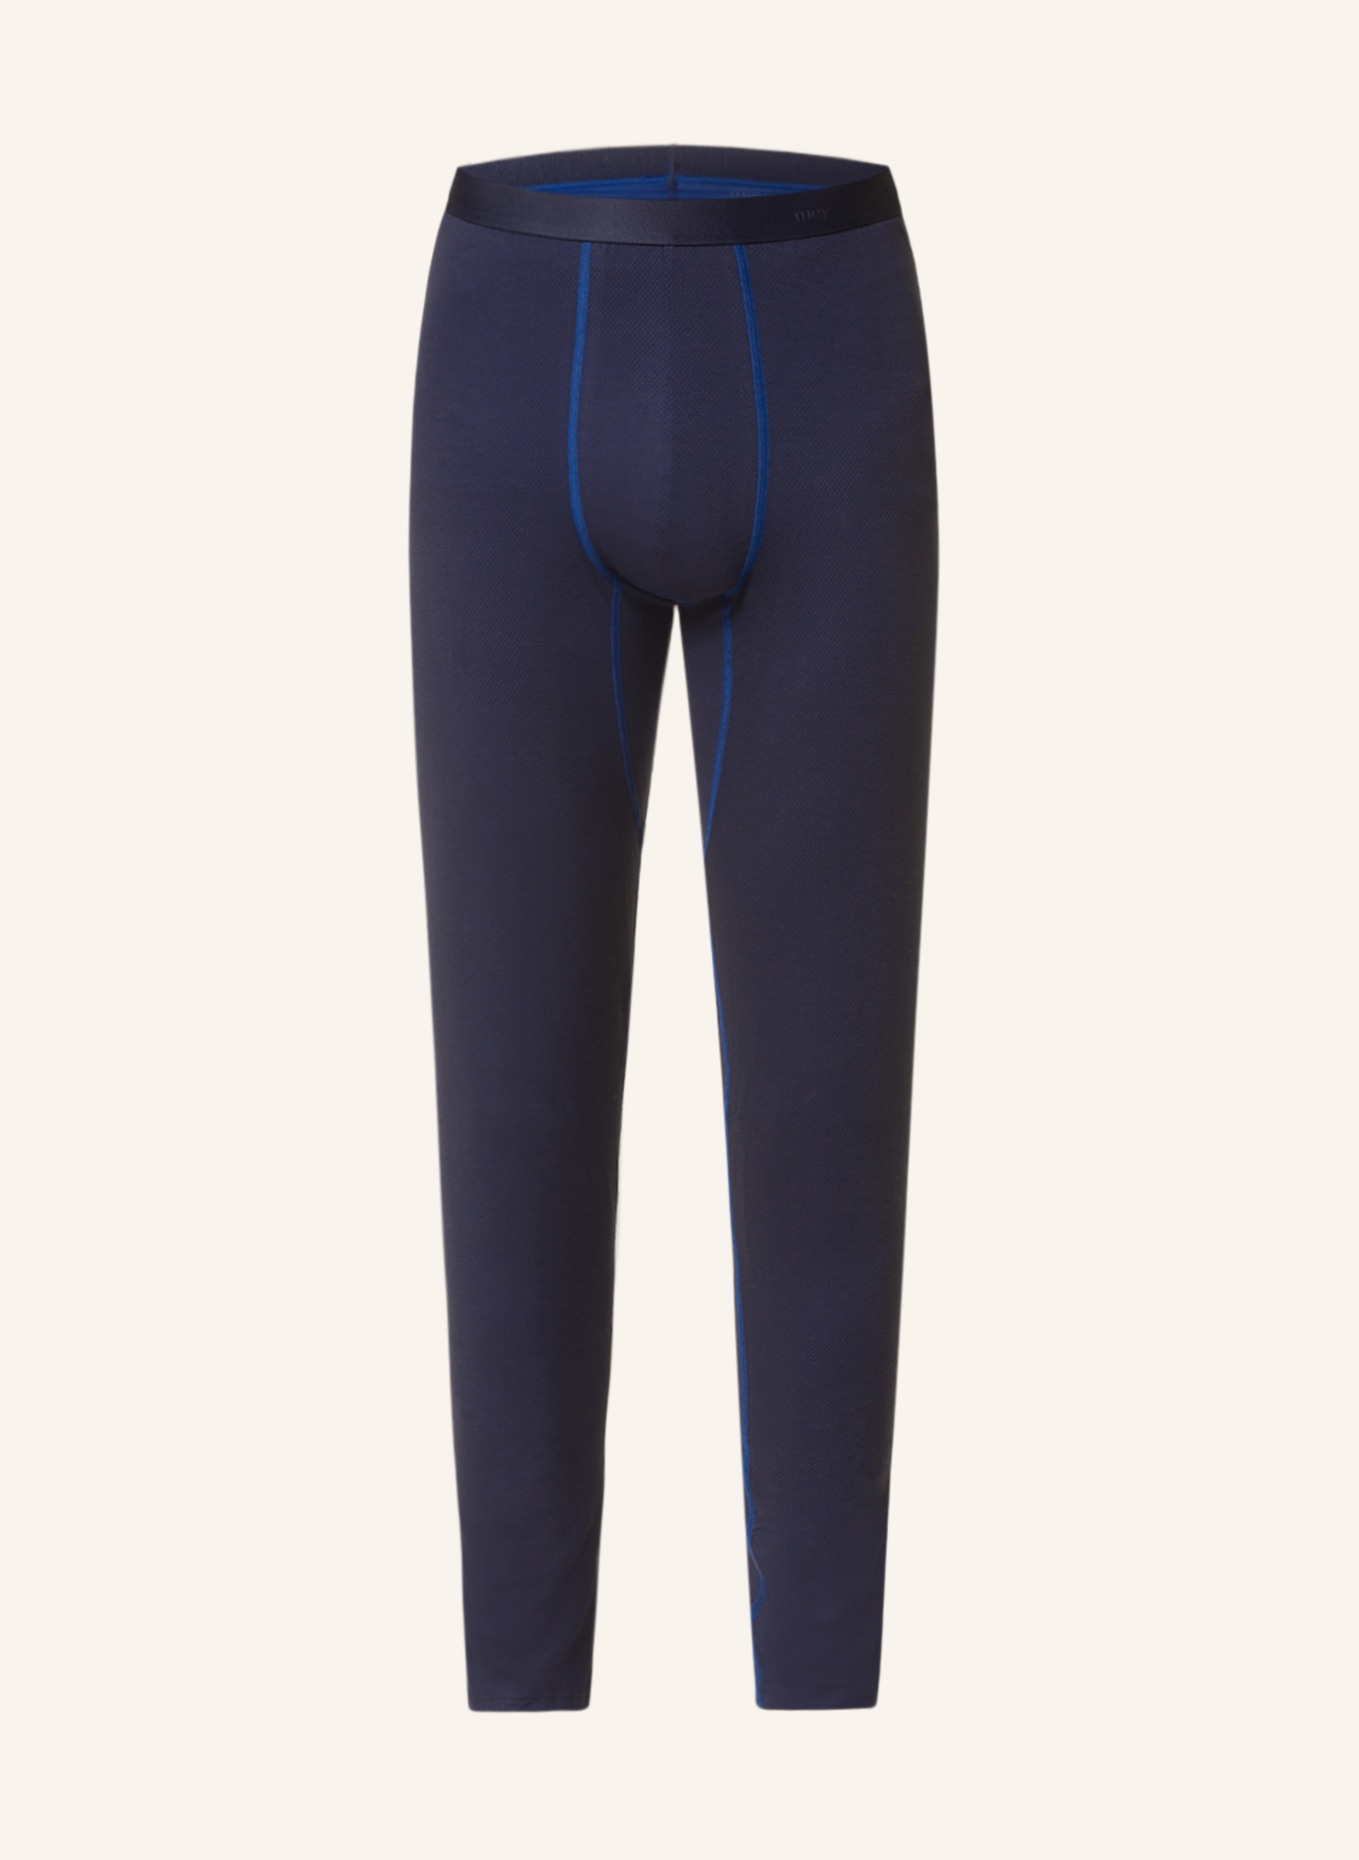 mey Functional underwear trousers series HIGH PERFORMANCE , Color: DARK BLUE (Image 1)